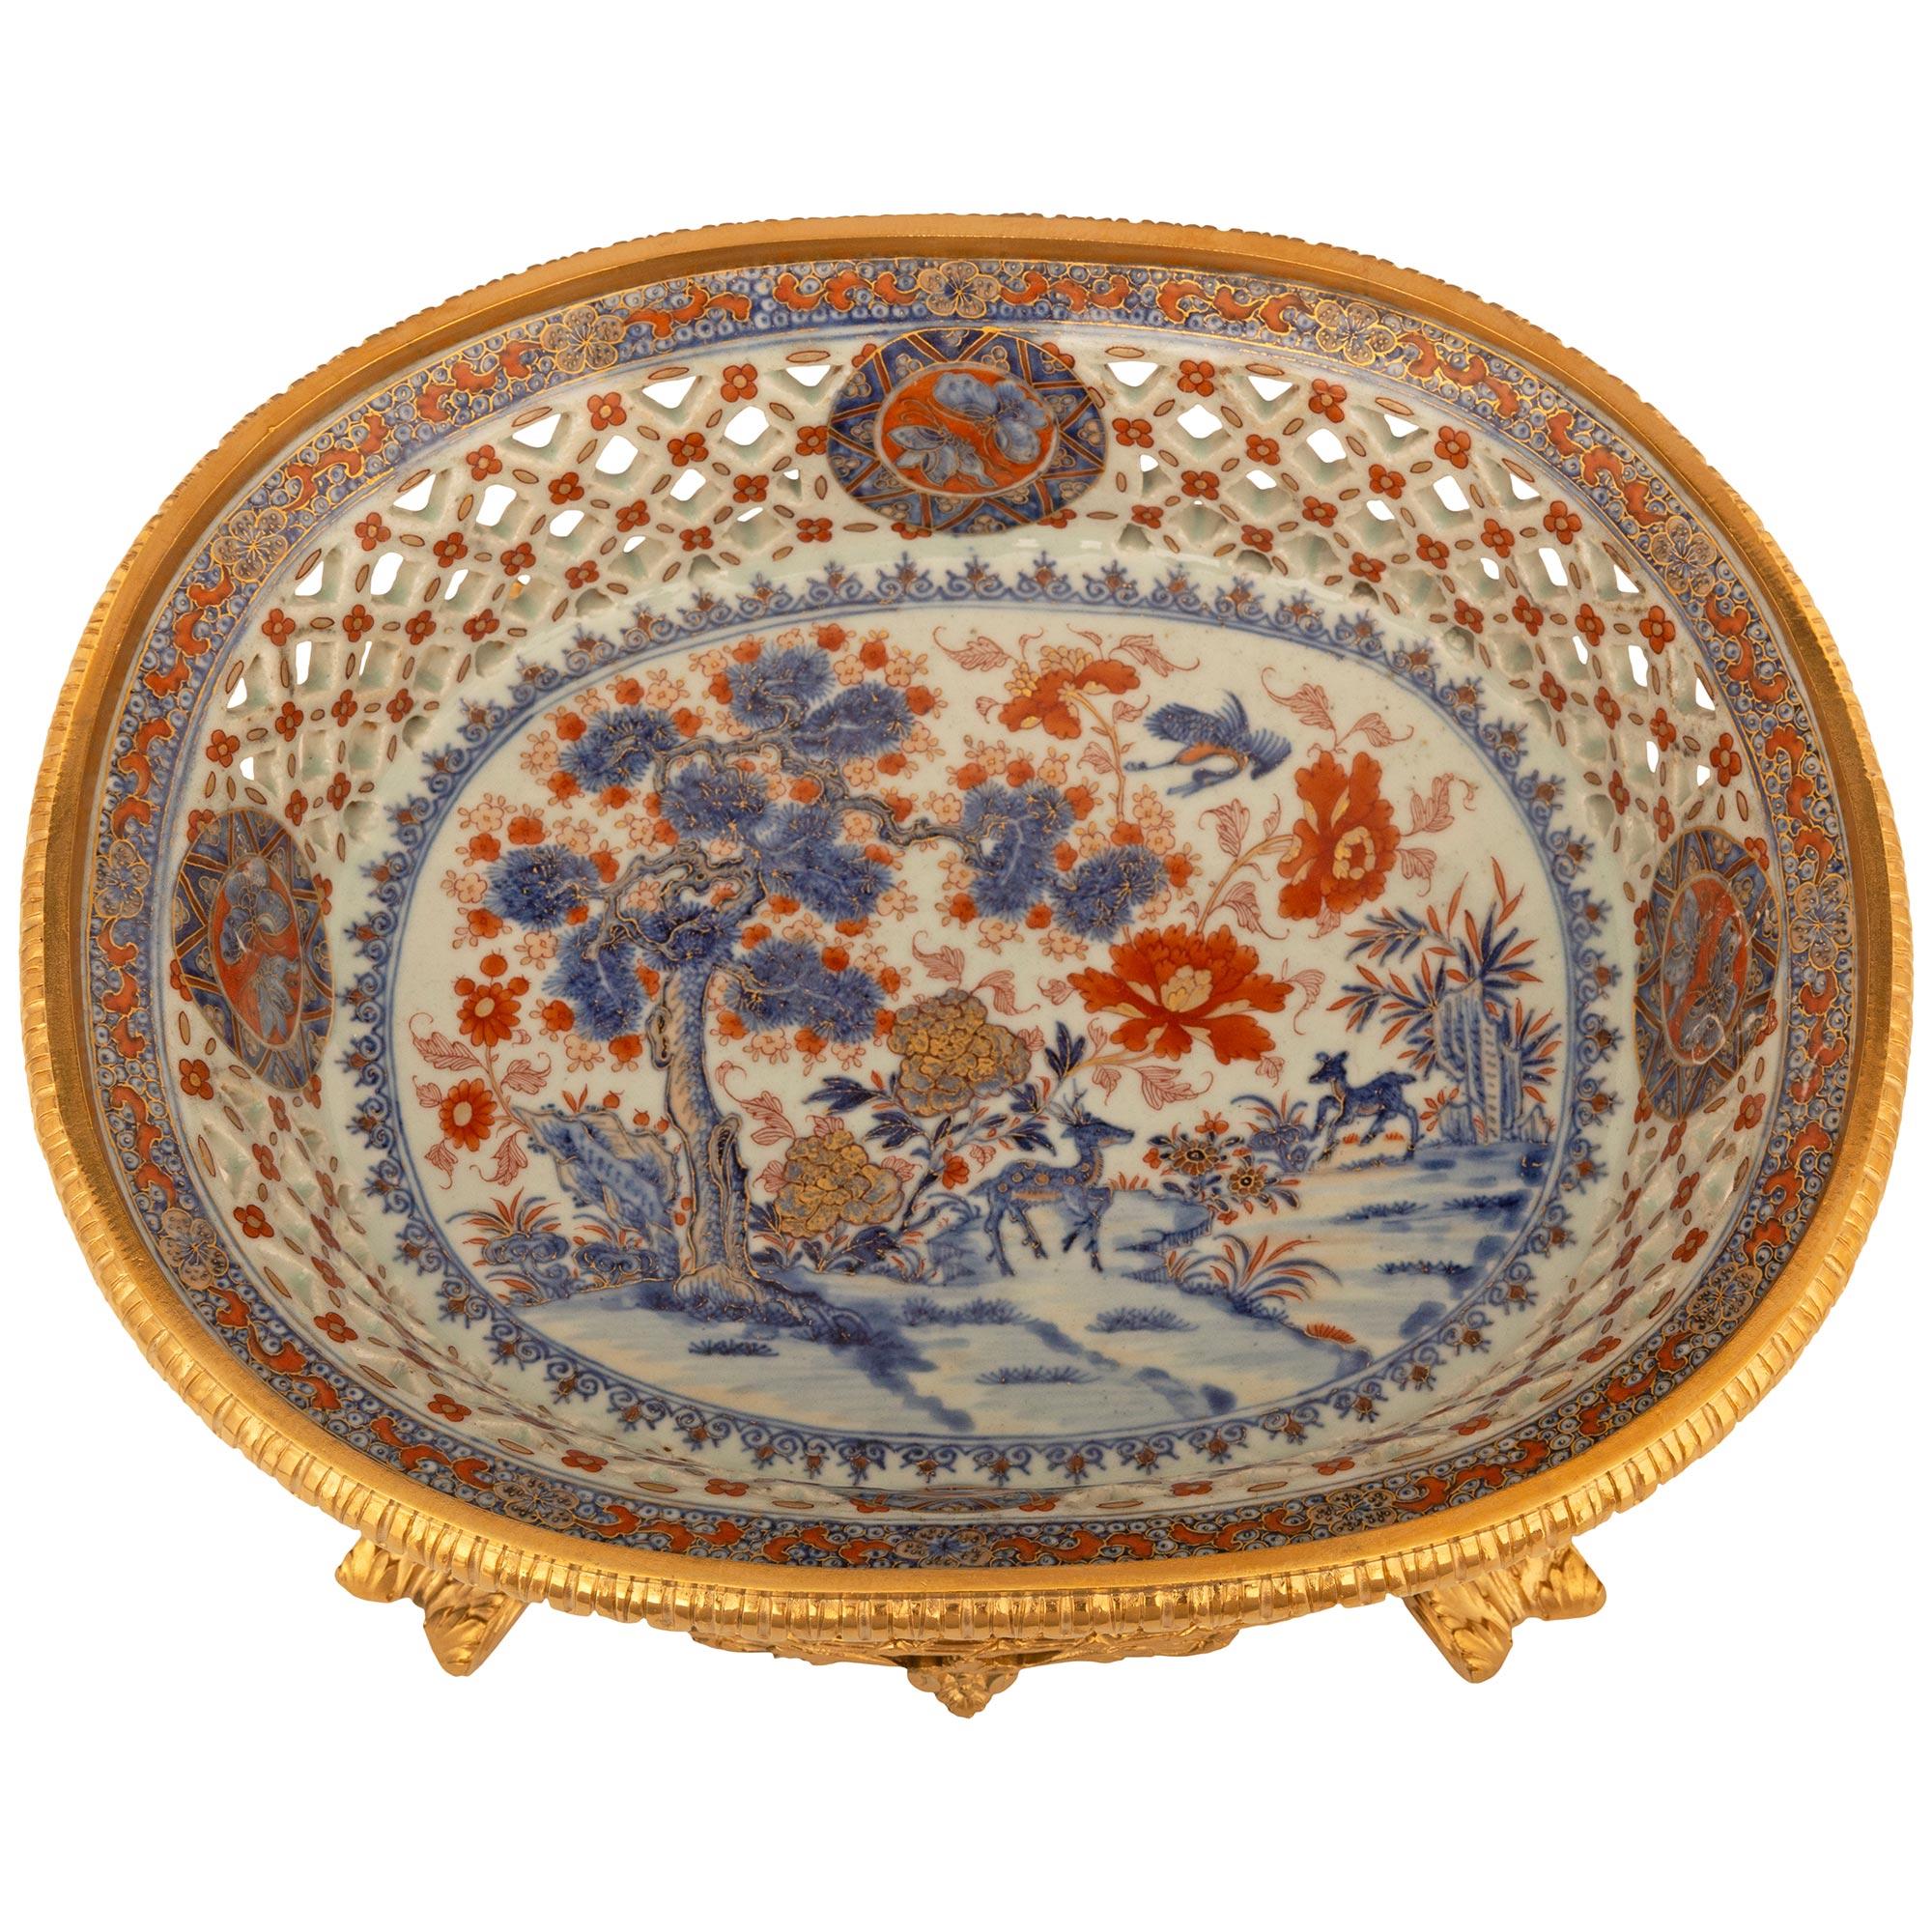 A stunning and highly quality Japanese 19th century Imari Porcelain and French Louis XVI st. Ormolu centerpiece. This exquisite centerpiece is supported by four foliate decorated feet flanking central reserves displaying berried foliate and arbalest